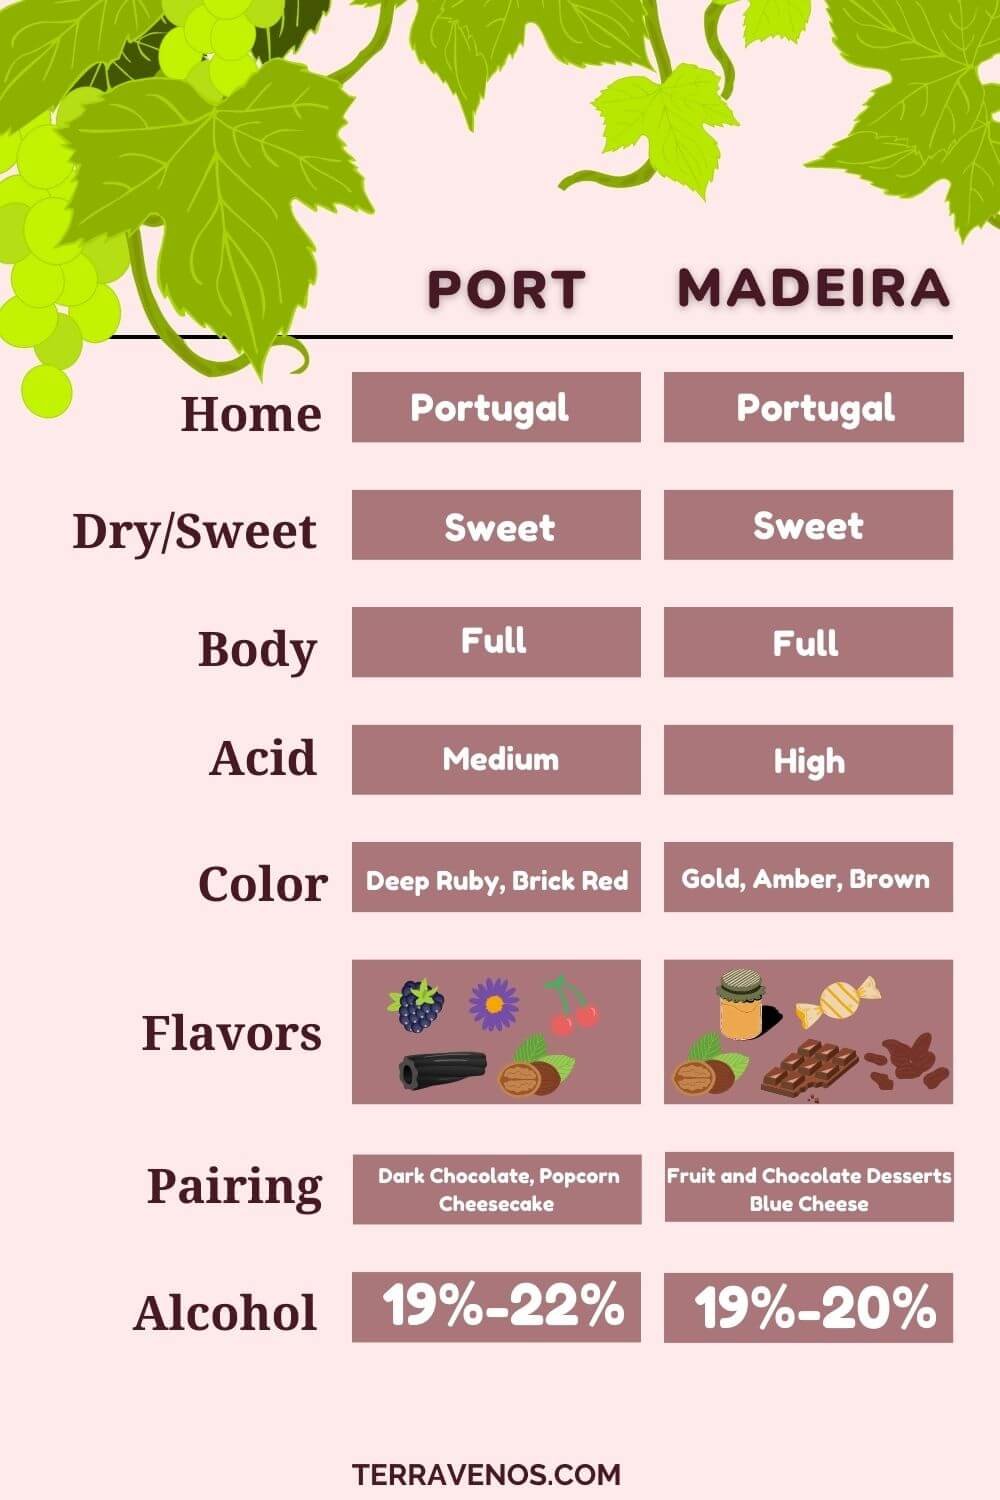 port vs madeira chart side-by-side comparison infographic